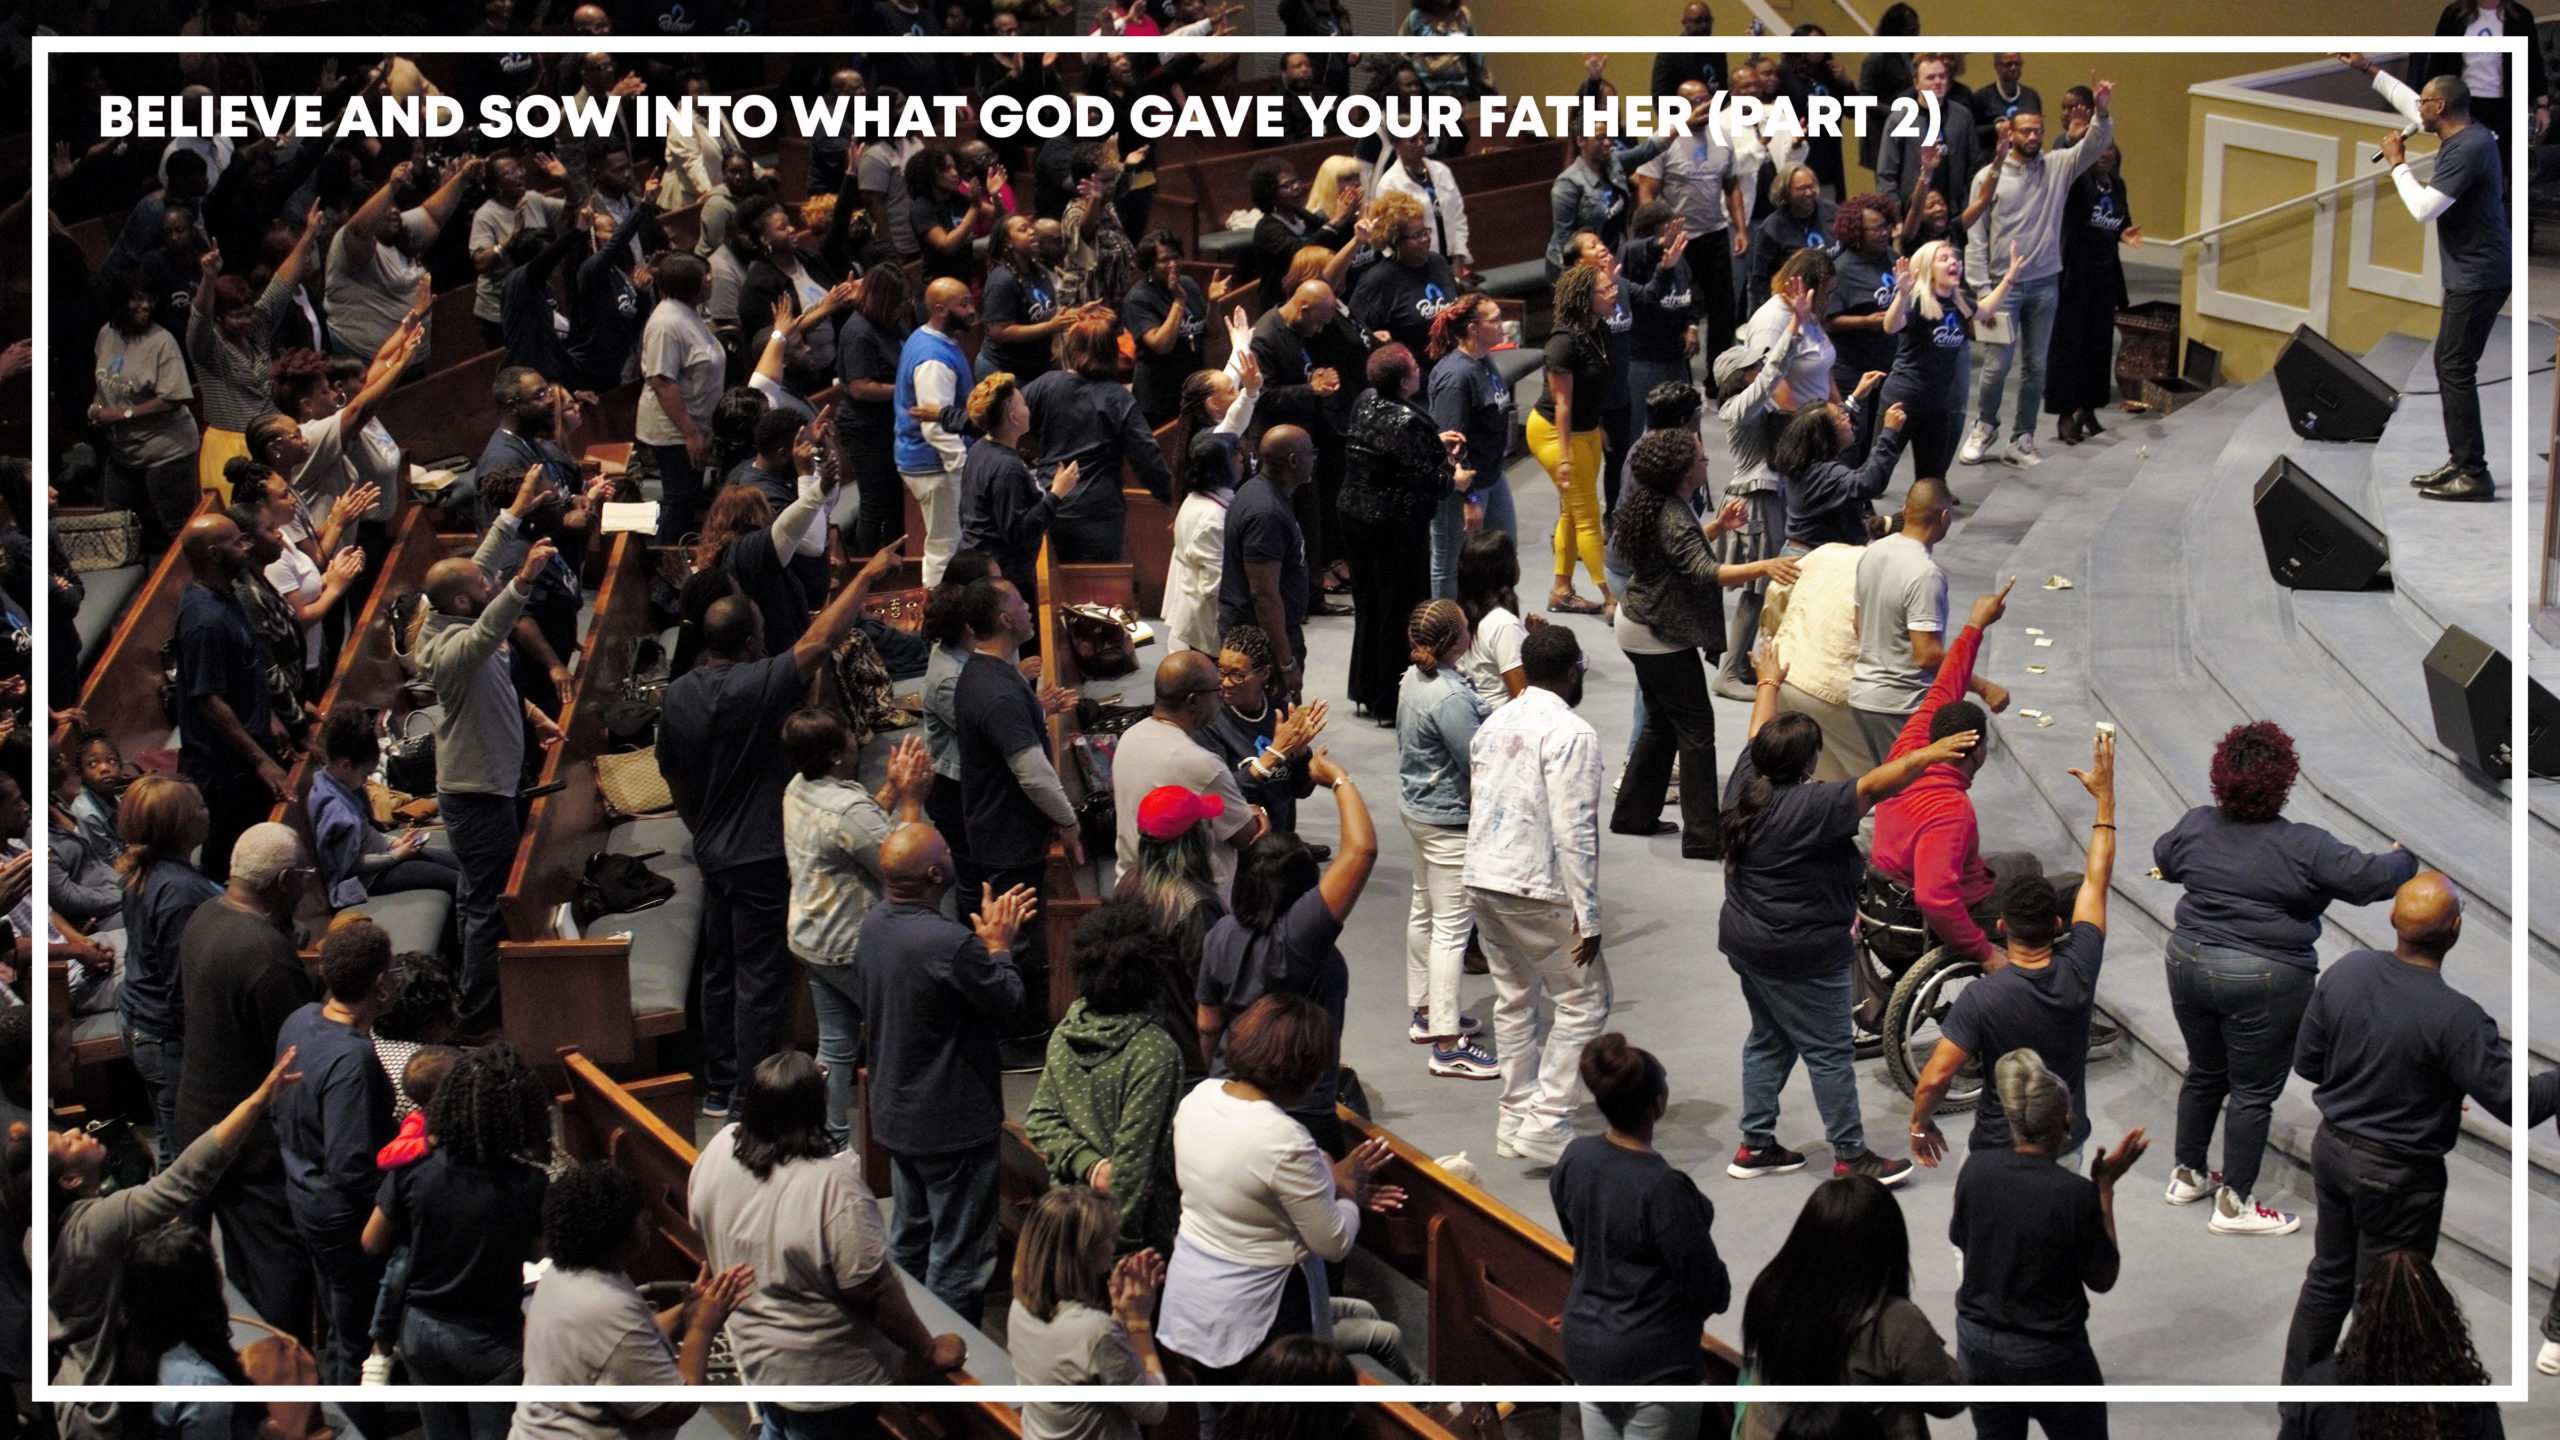 Believe And Sow Into What God Gave Your Father (Part 2)